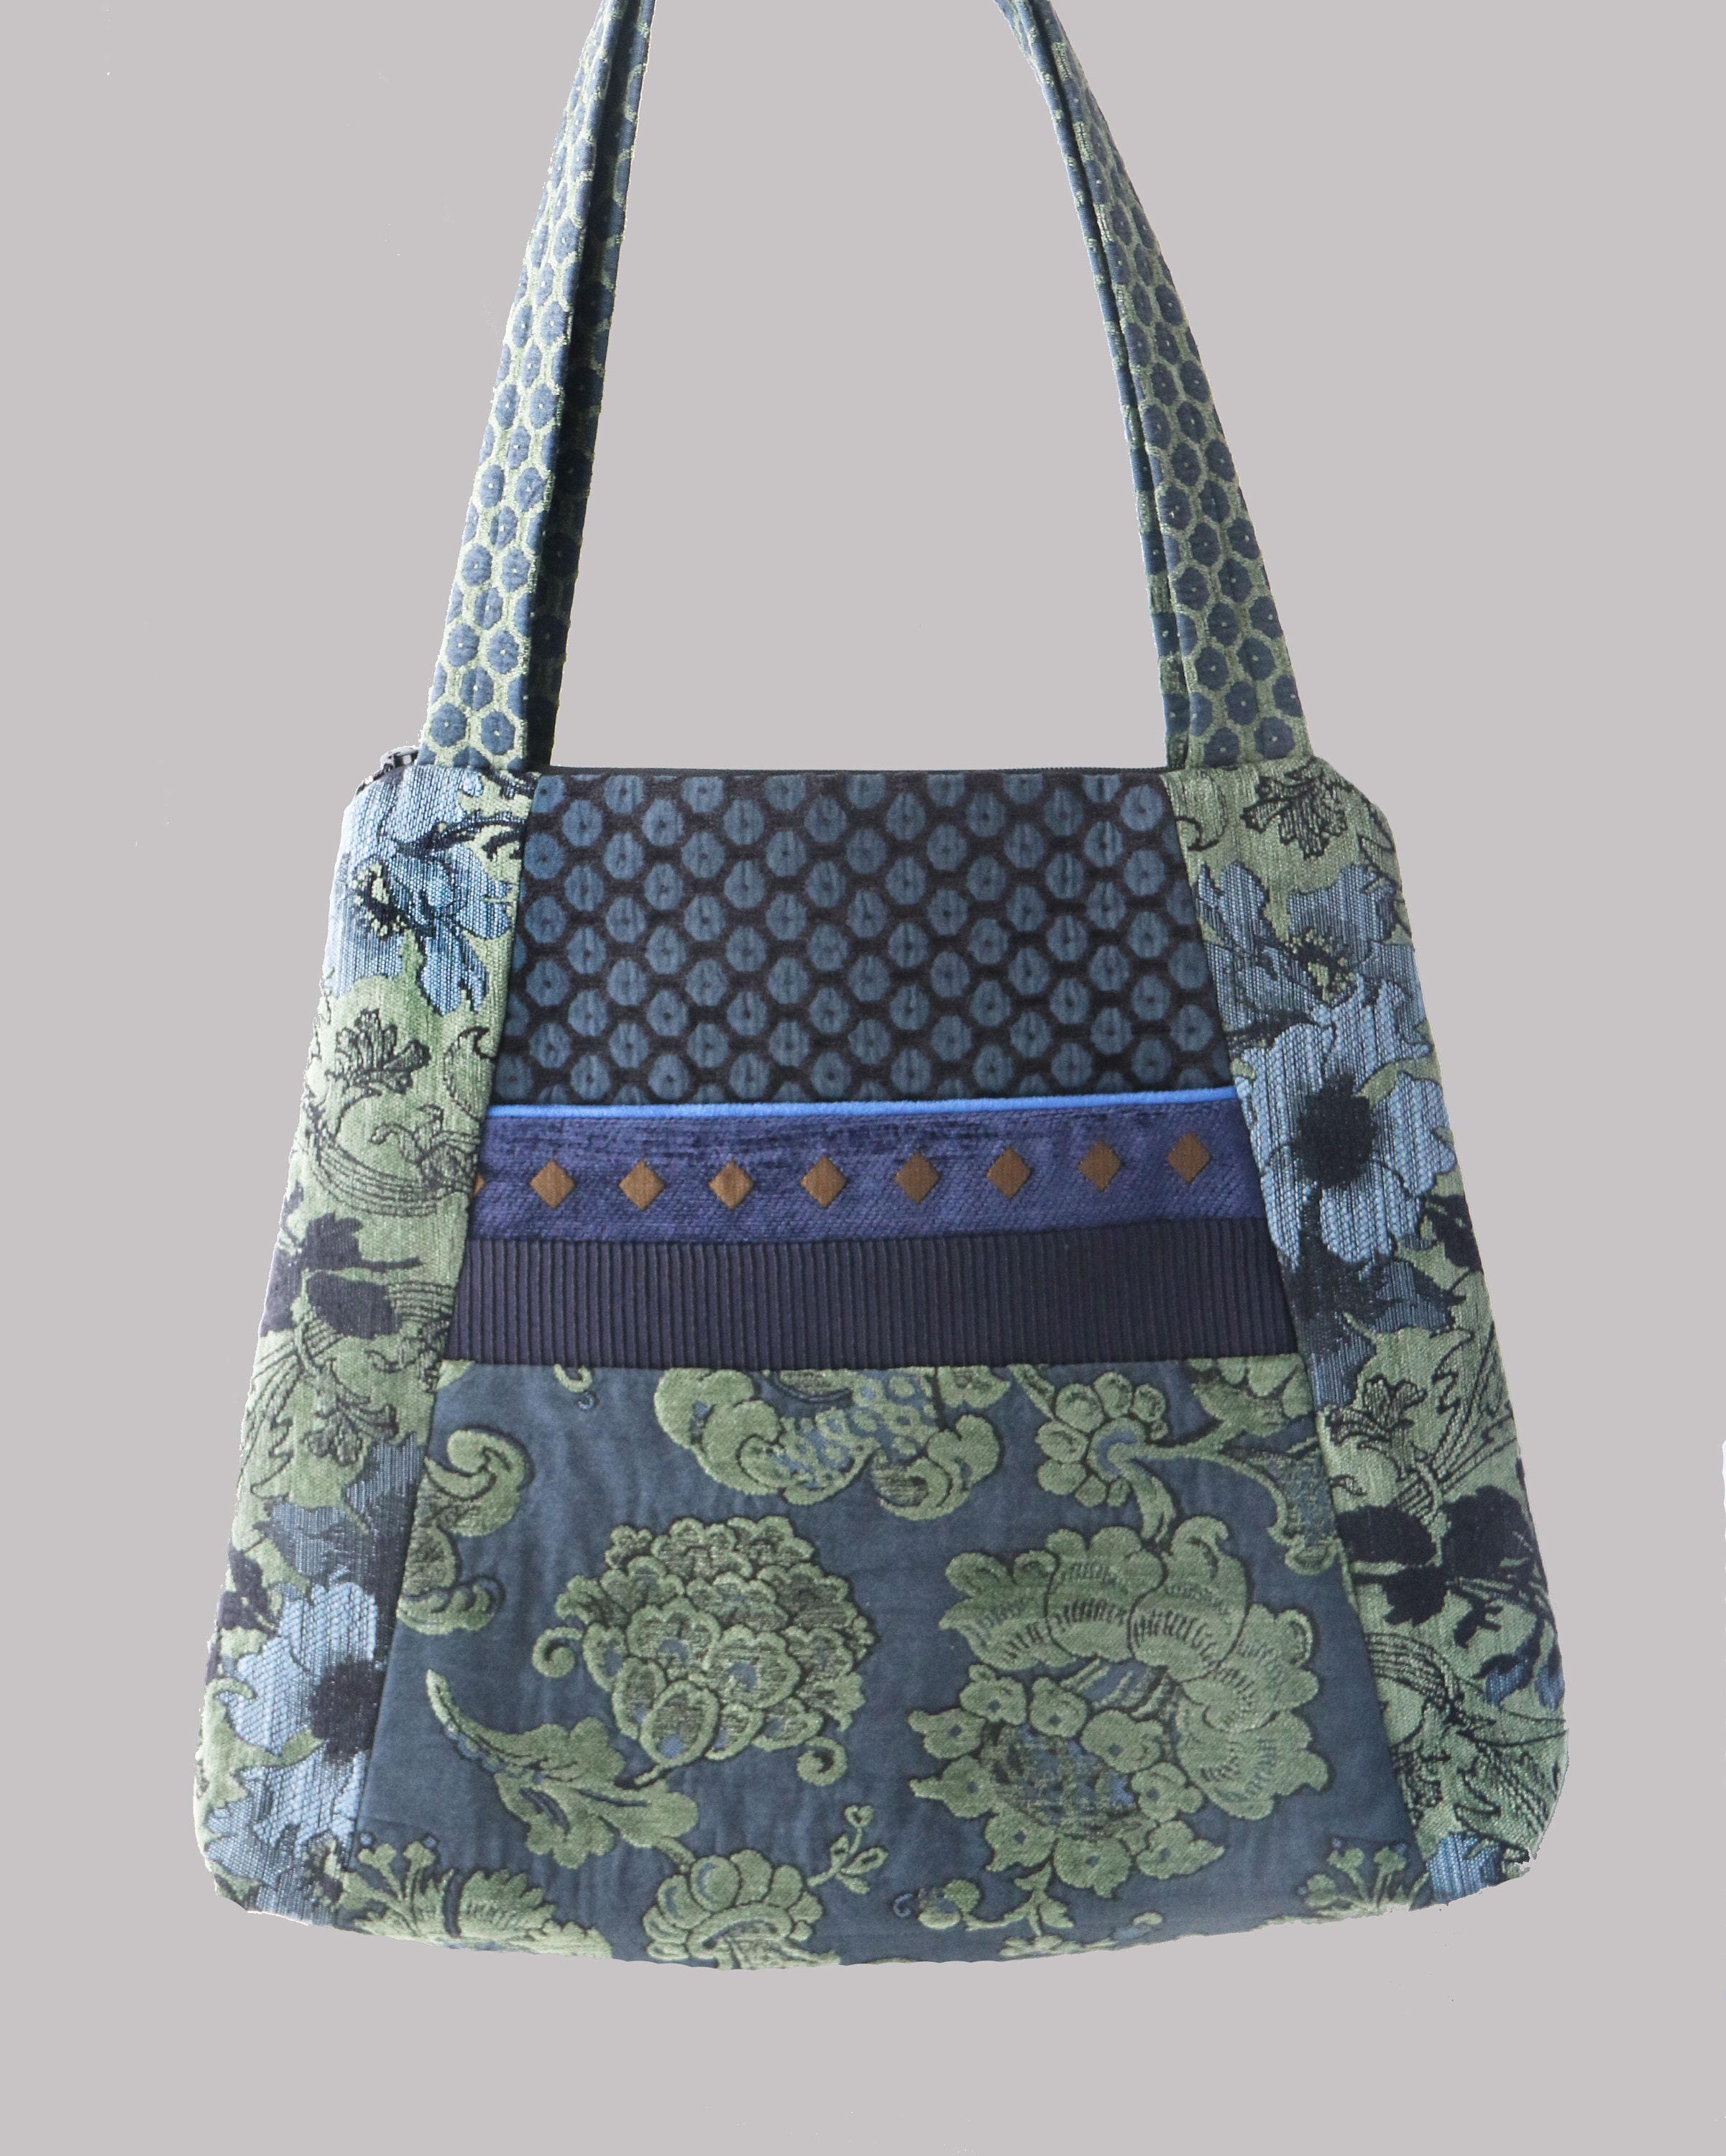 Larkspur Tote Bag in Blue and Green Floral Jacquard Upholstery - Etsy